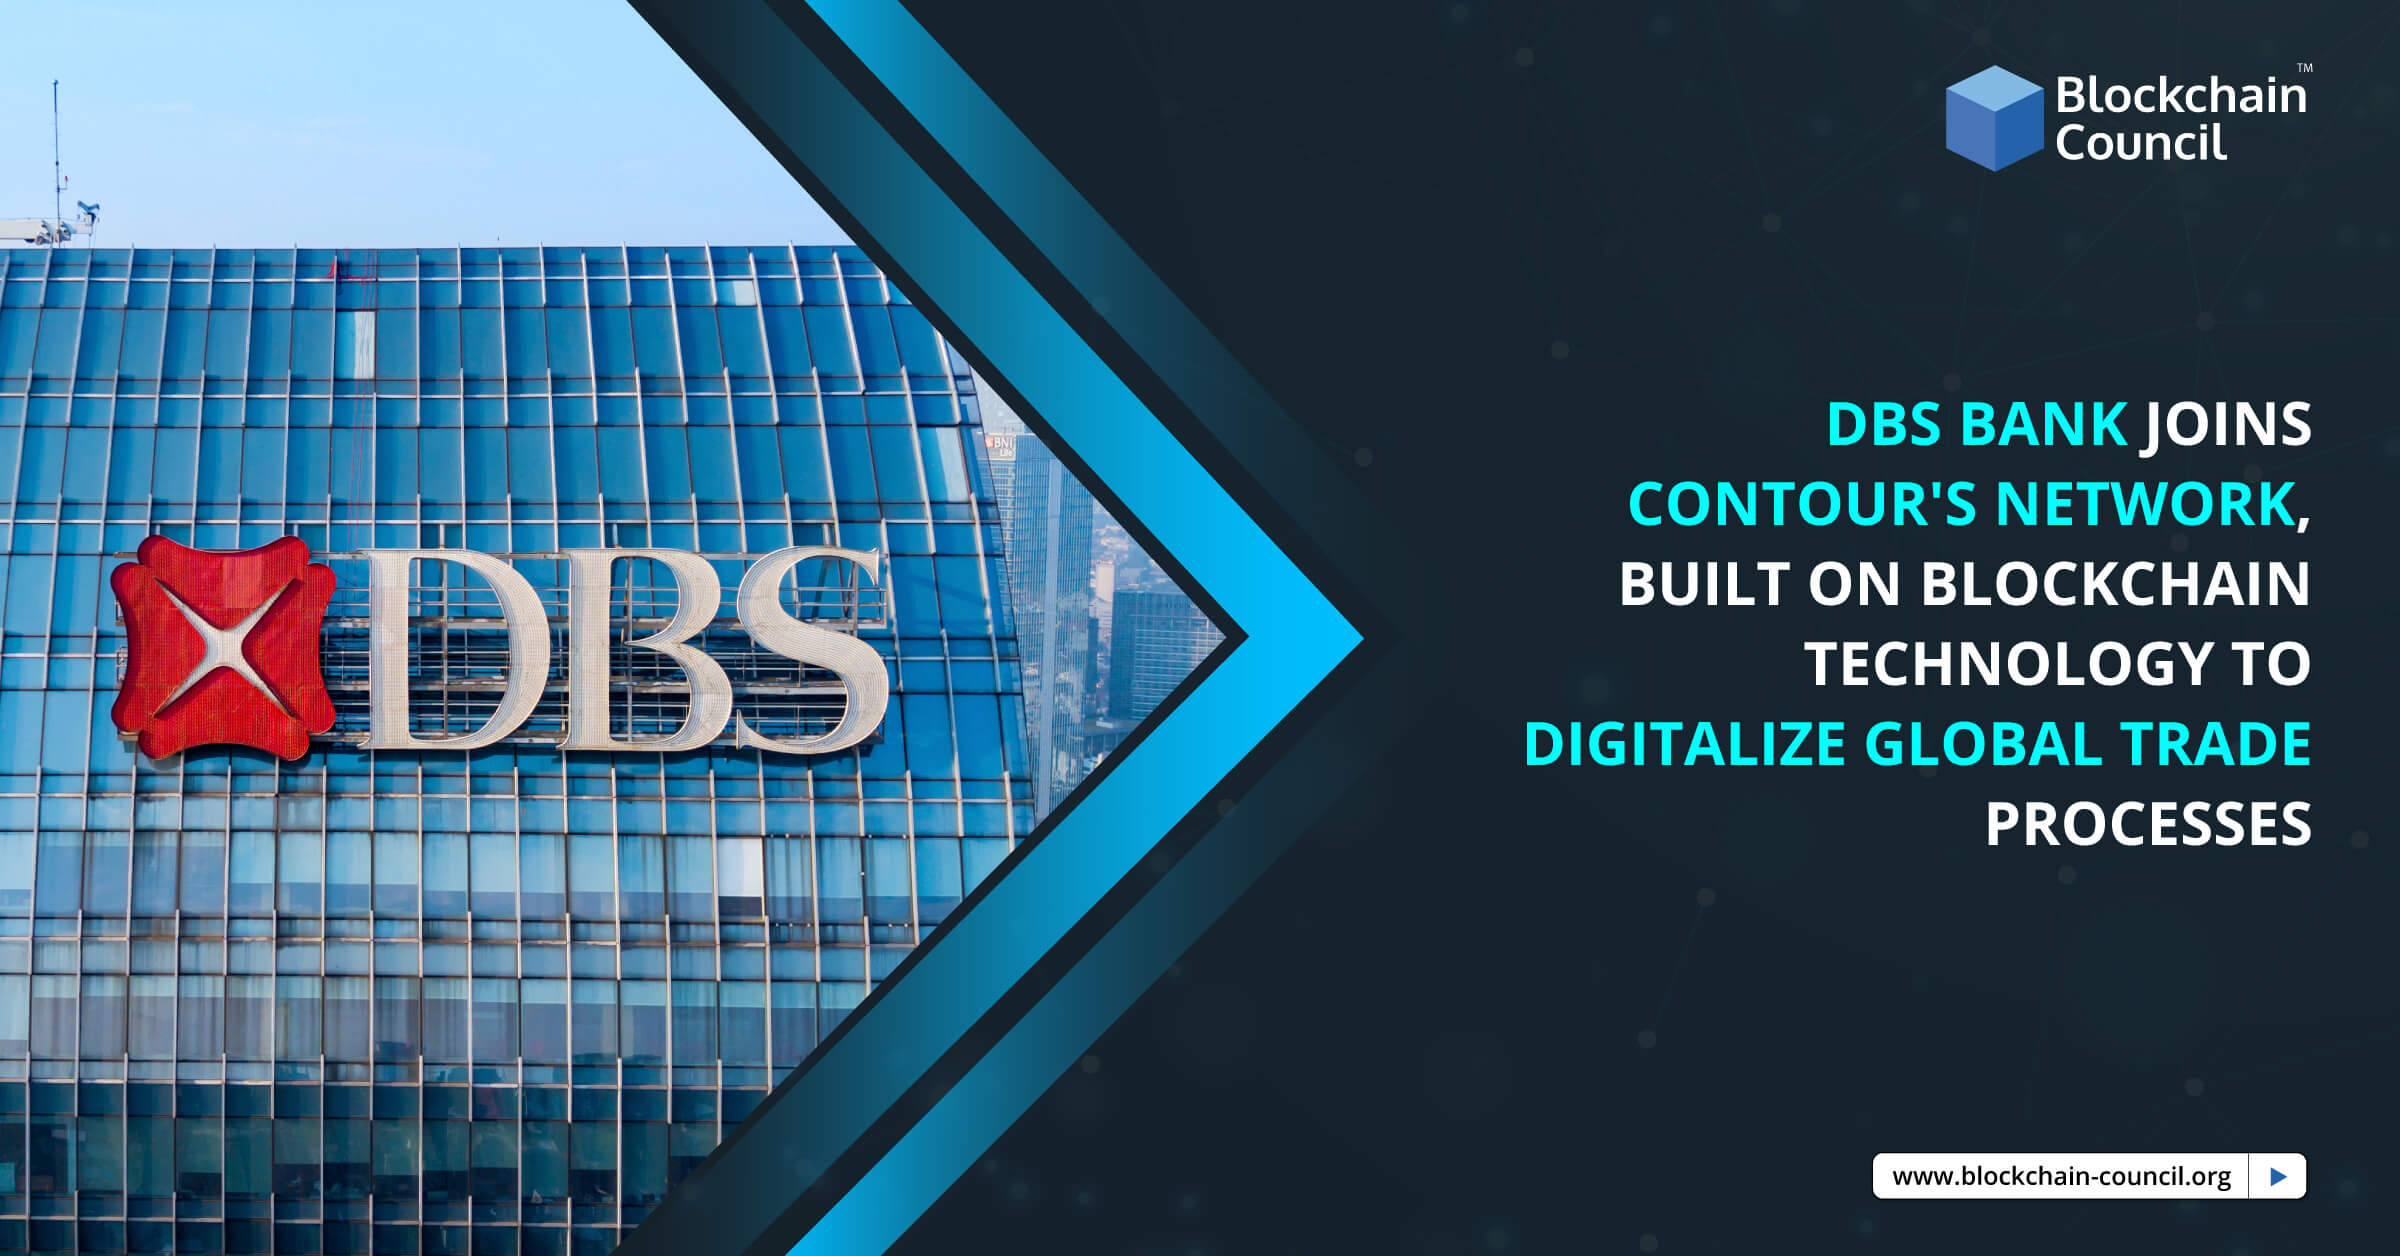 DBS-Bank-Joins-Contour's-Network,-Built-on-Blockchain-Technology-to-Digitalize-Global-Trade-Processes